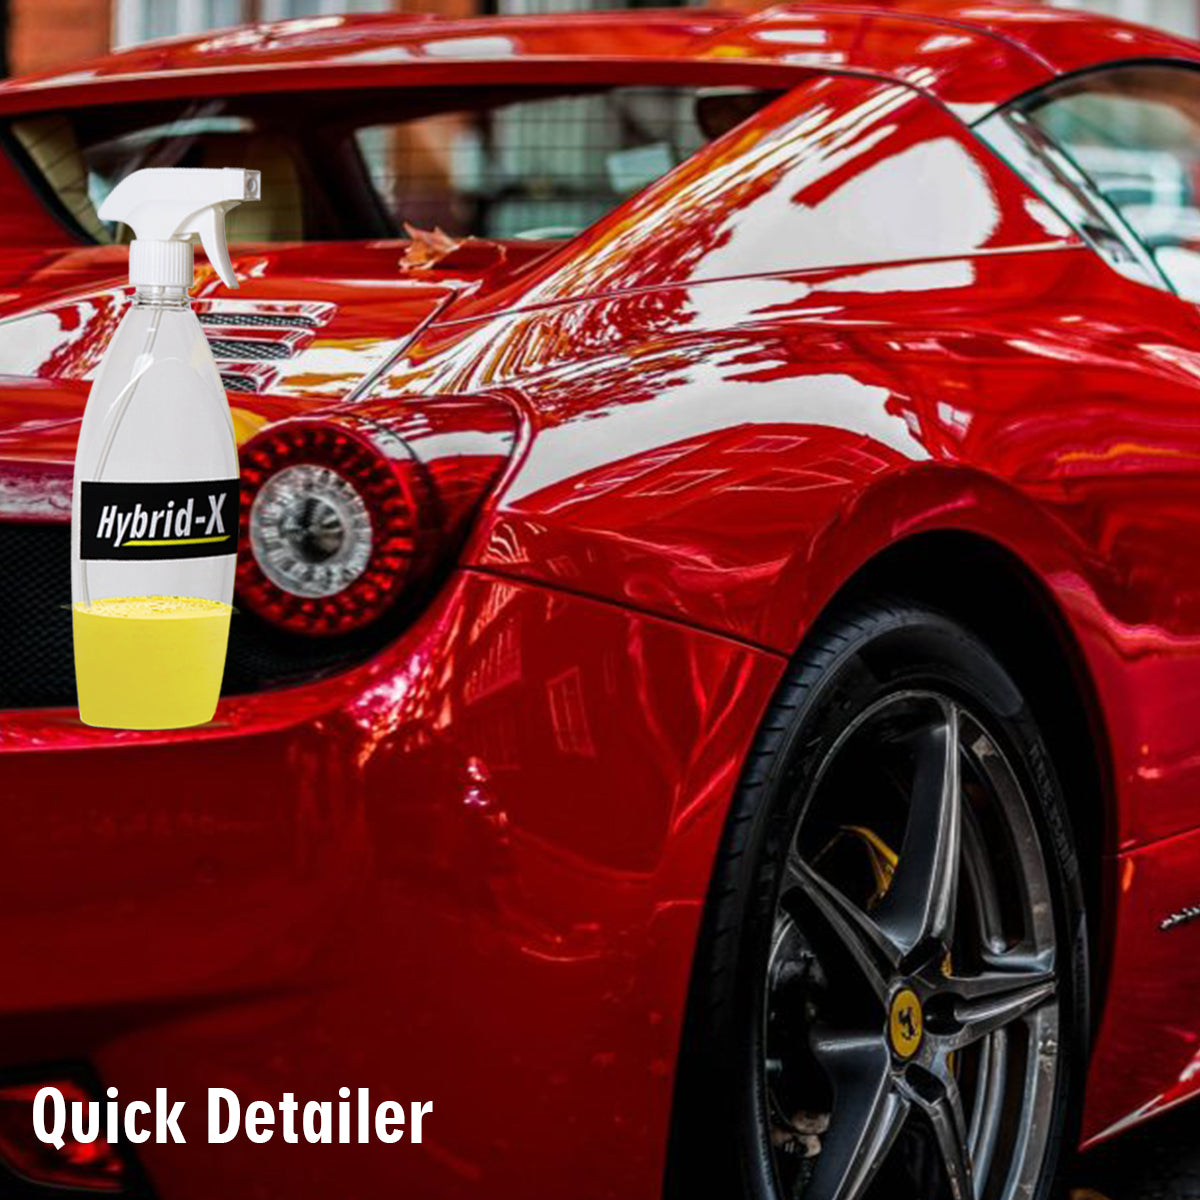 Wavex Hybrid-X Spray Wax, Waterless Wash, Rinse Aid and Quick Detailer Dilutes 20 Times with Water.